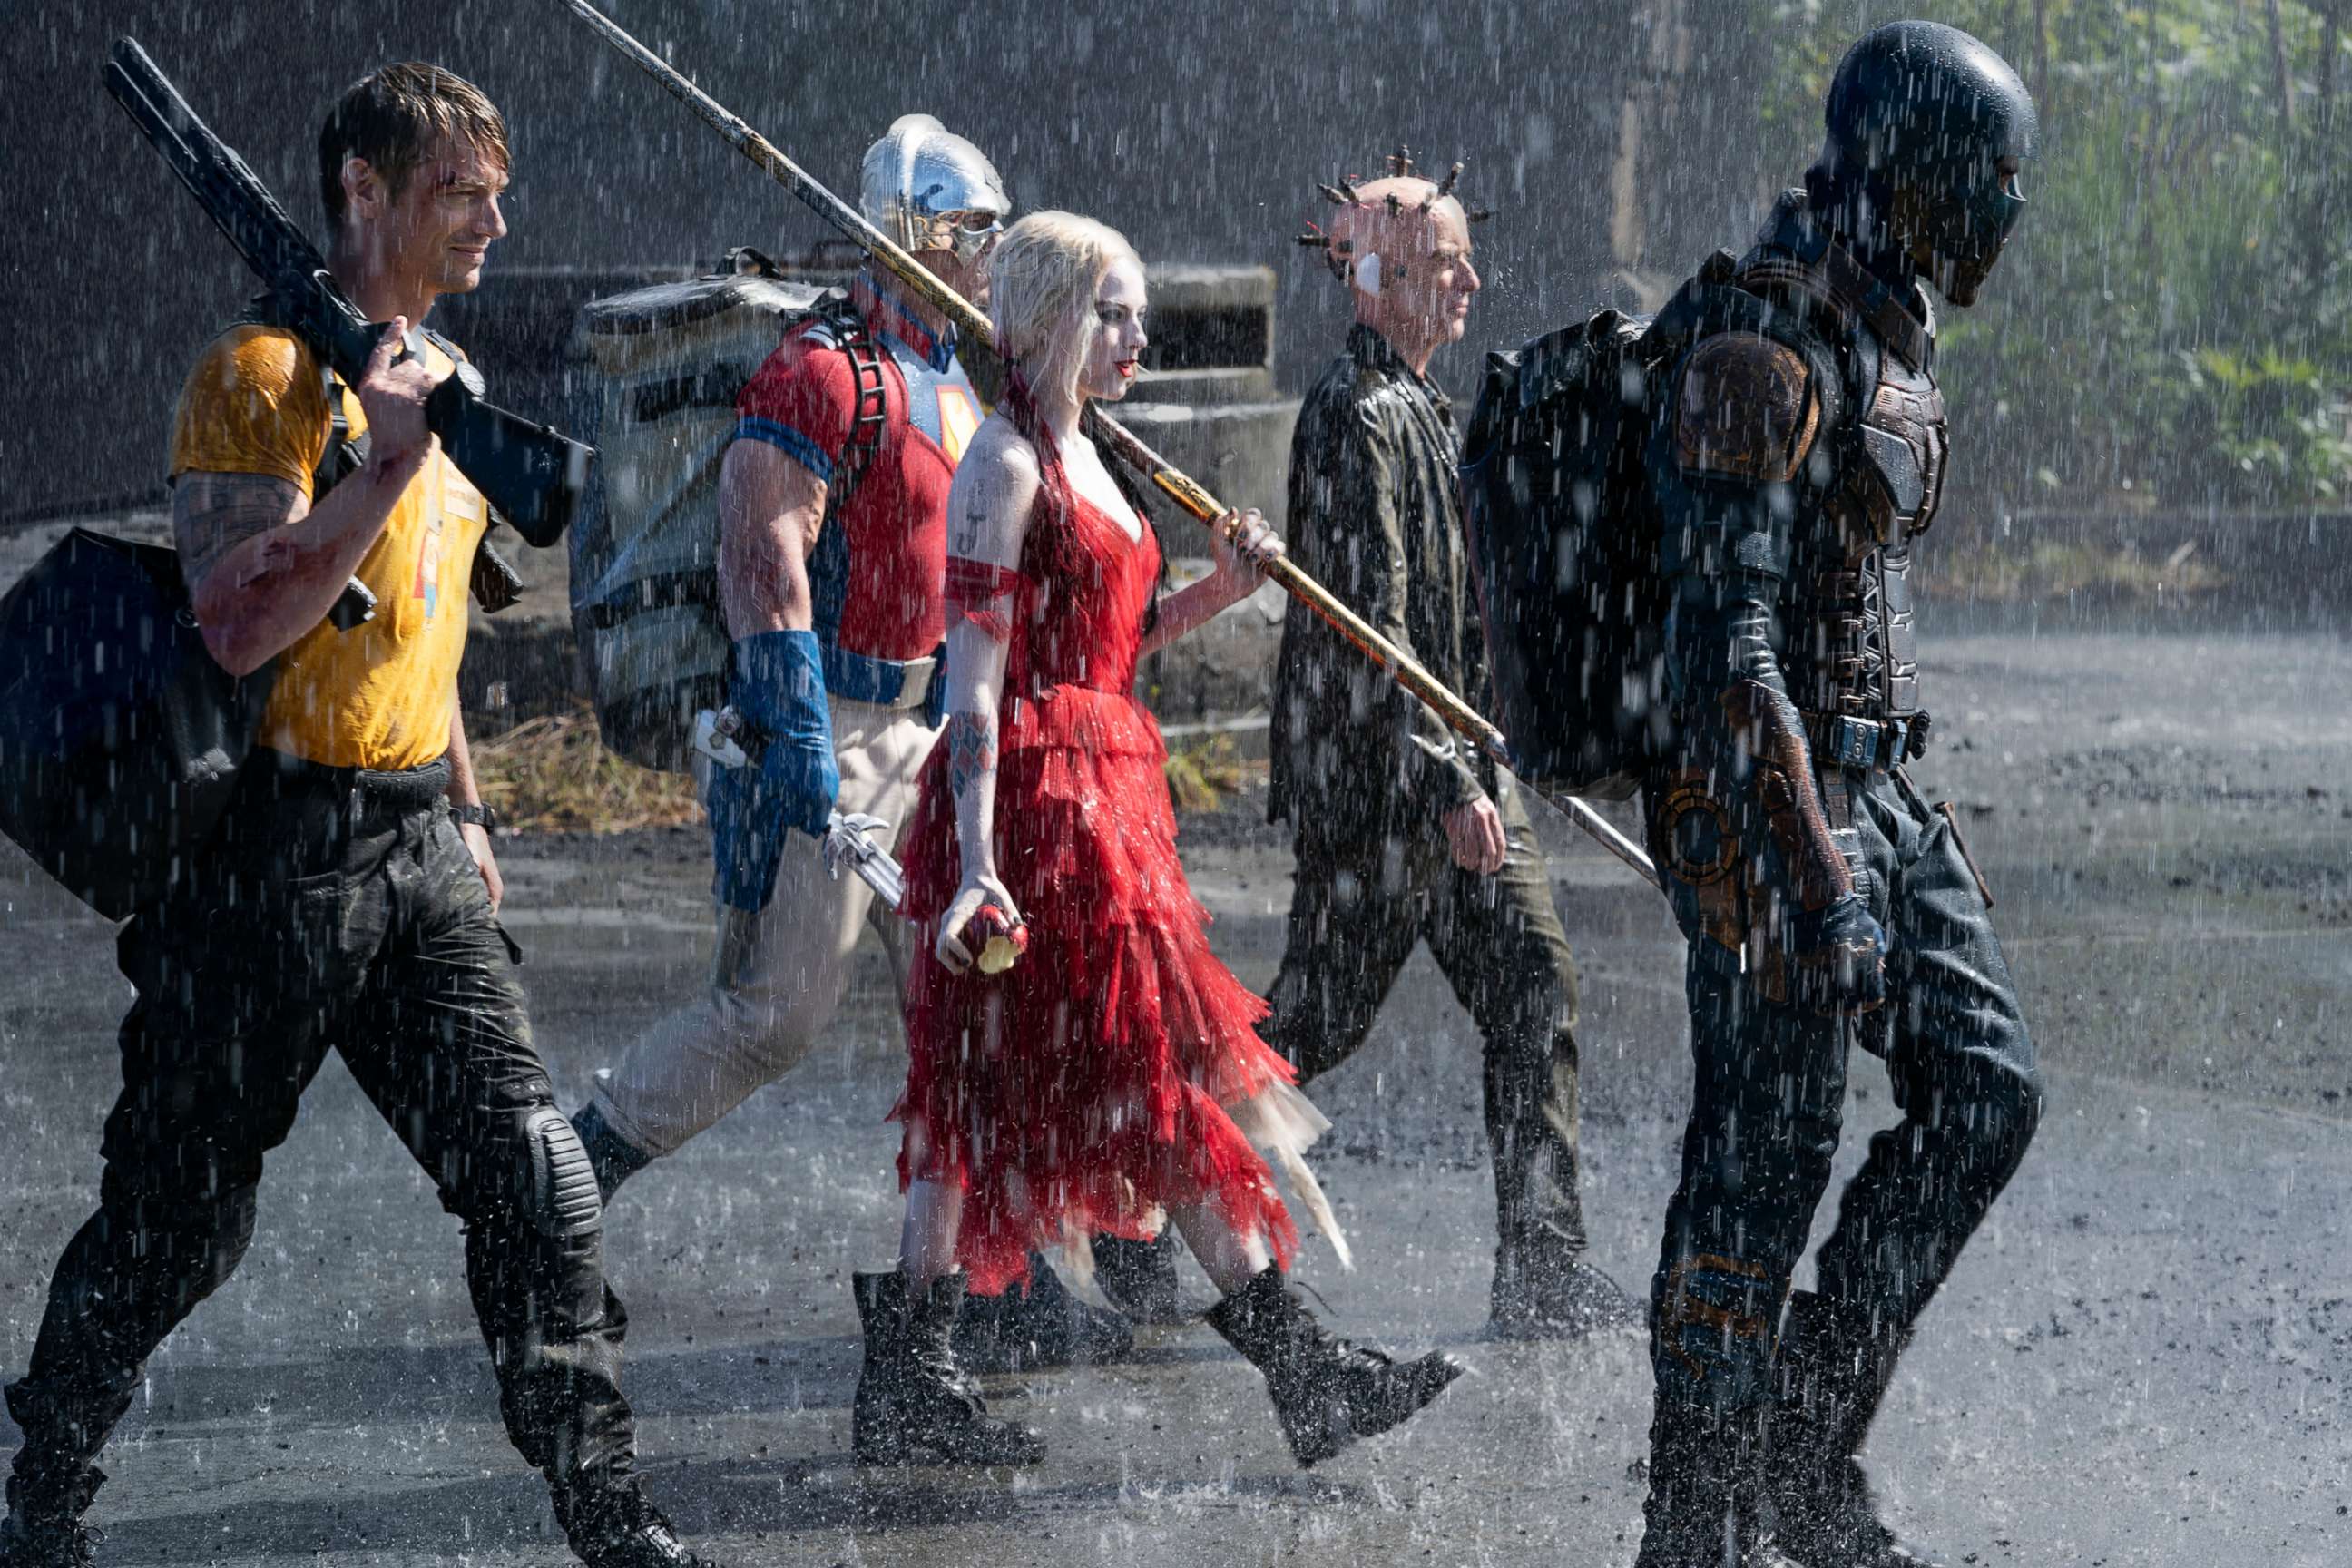 PHOTO: Joel Kinnaman as Rick Flag, John Cena as Peacemaker, Margot Robbie as Harley Quinn, Peter Capaldi as The Thinker and Idris Elba as Bloodsport are shown in Warner Bros. Pictures' action adventure "The Suicide Squad."